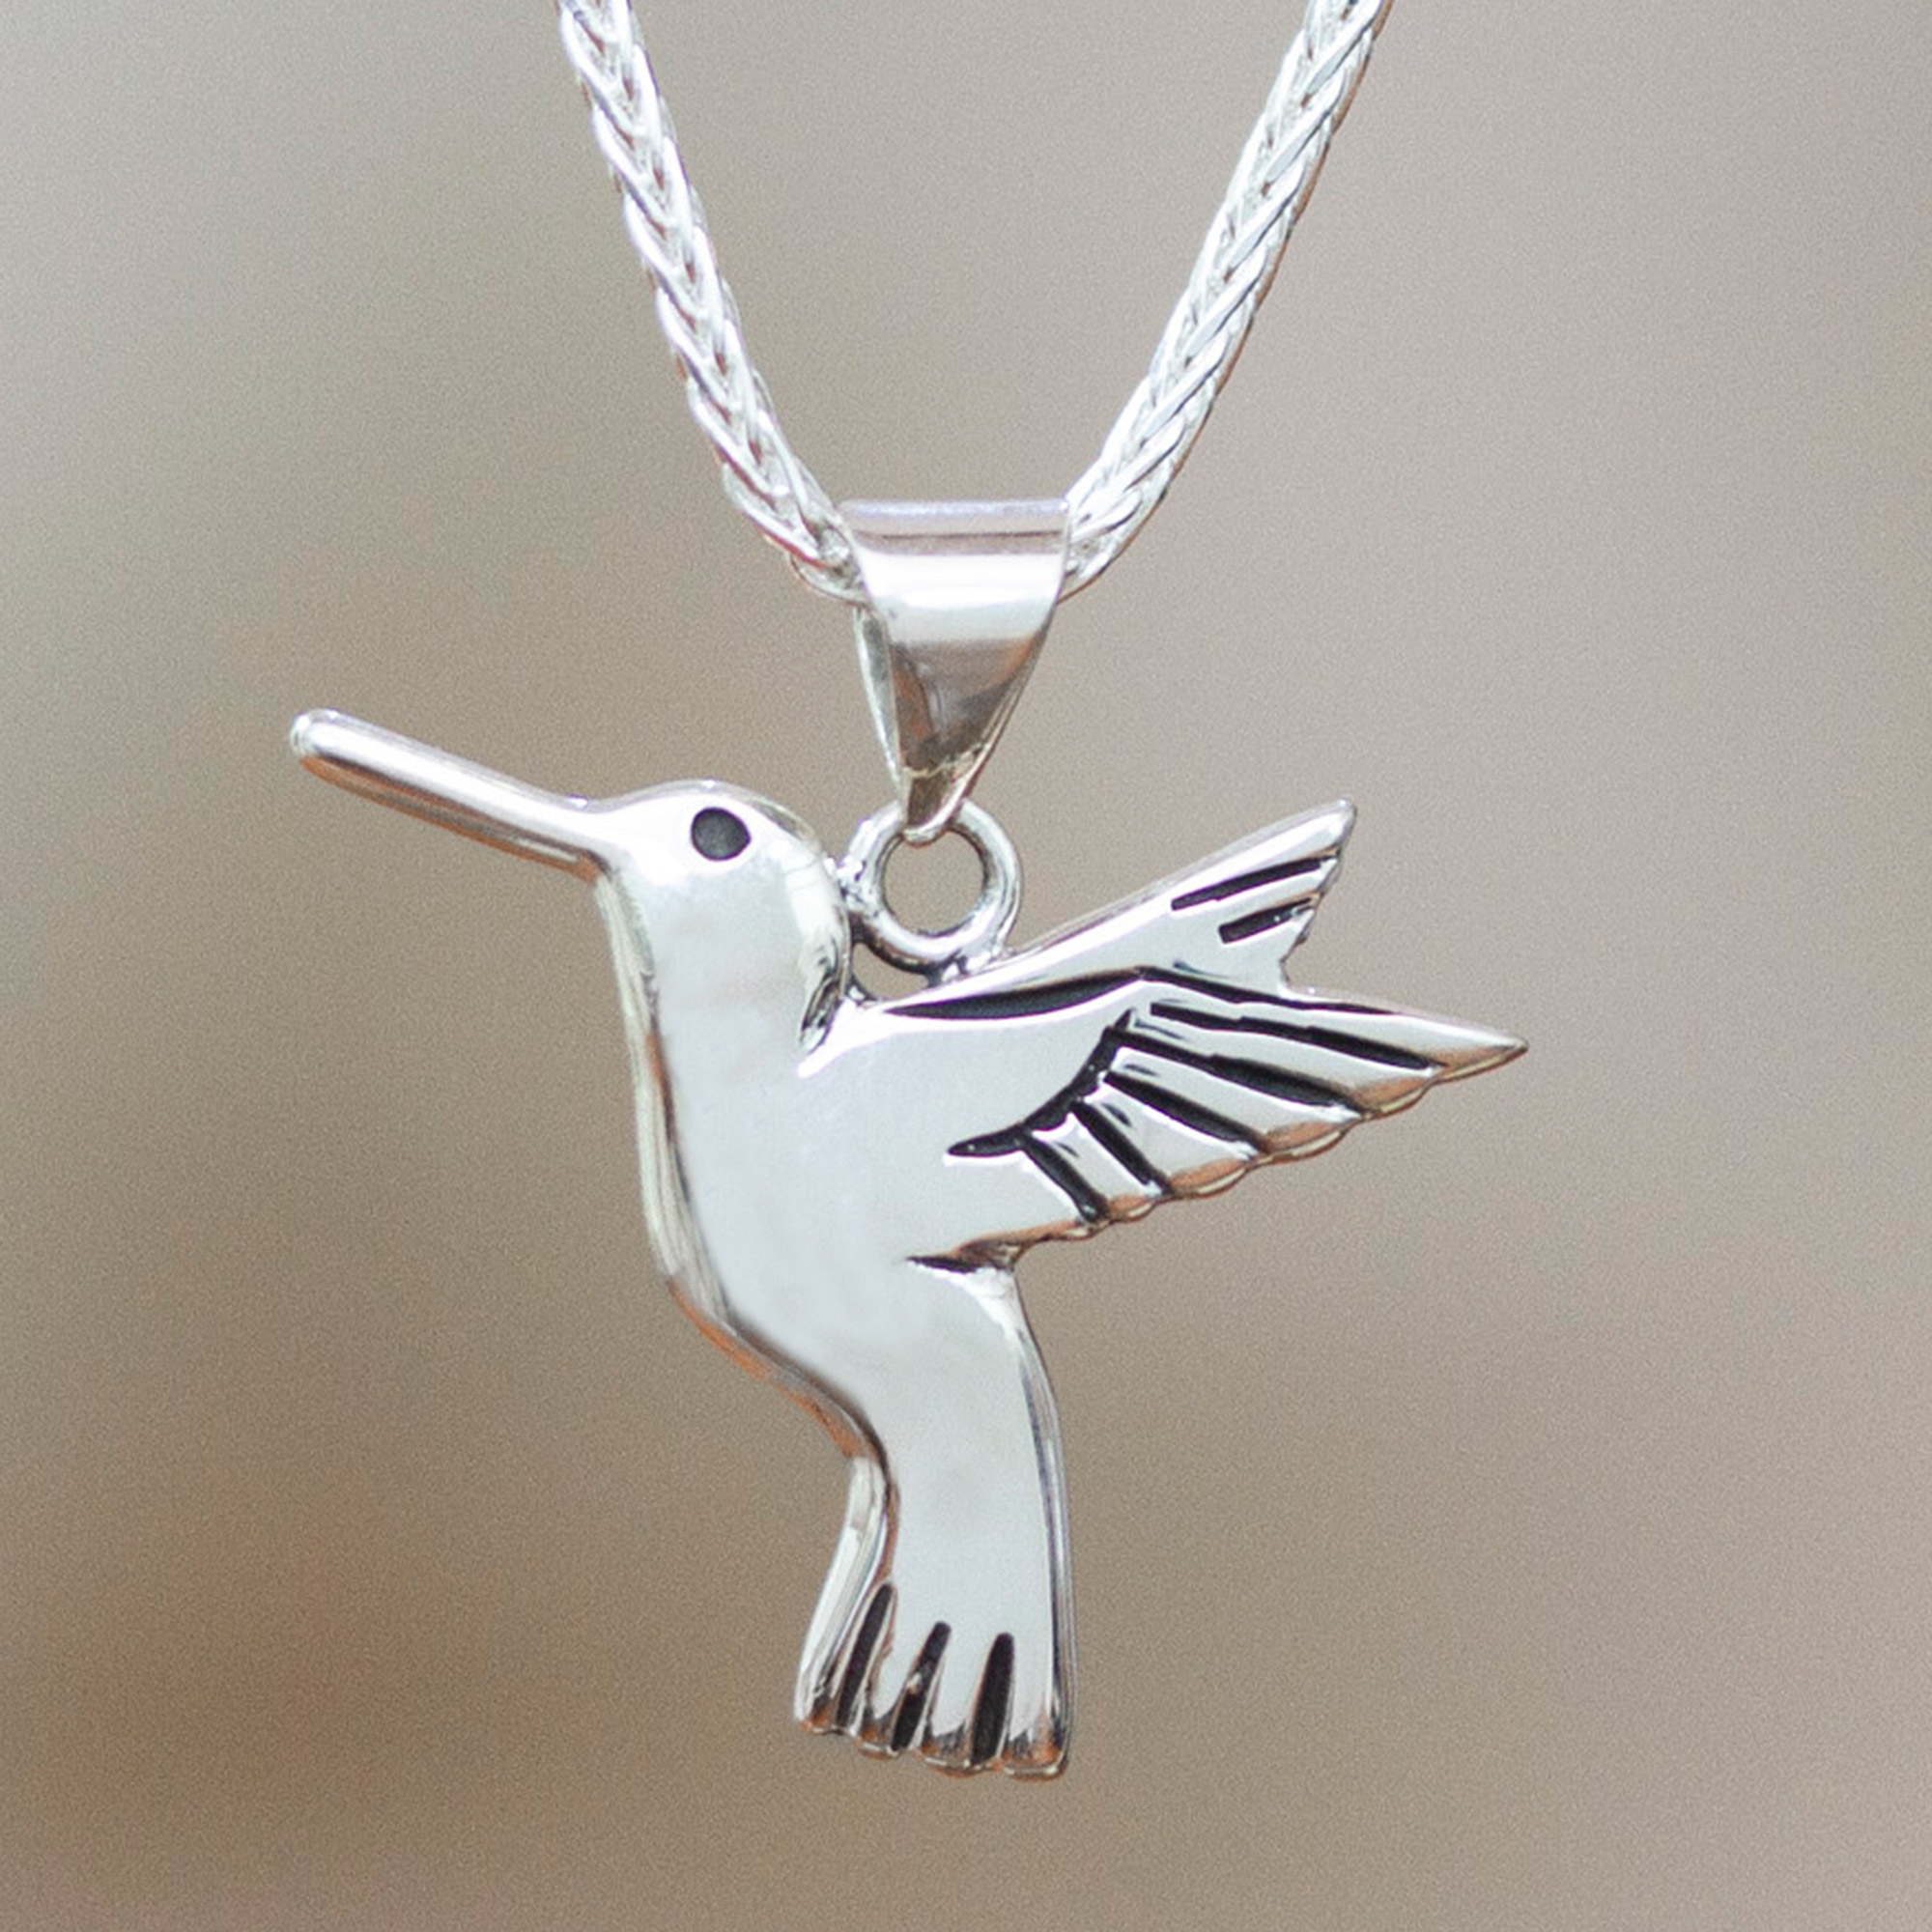 Rhodium-plated 925 Silver Hummingbird Pendant with 18 Necklace Jewels Obsession Silver Hummingbird Necklace 